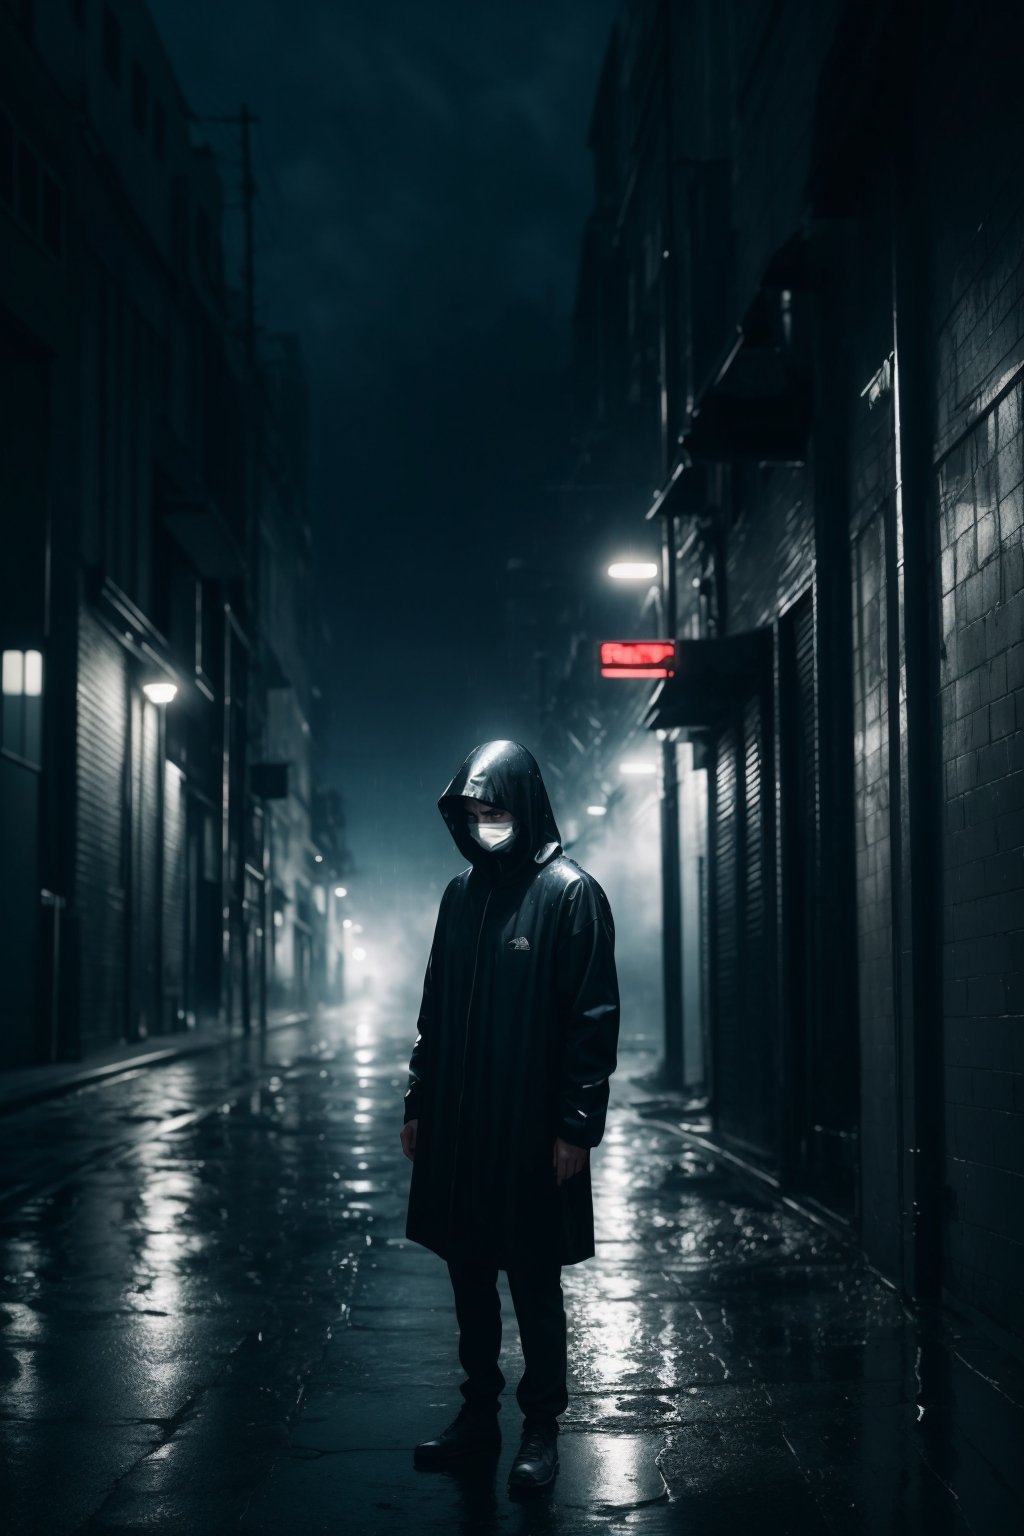 A man standing on the alley in the rain, a picture, dark visor covering face, he is sad, foreboding background, hooded figures, eerie, misty, foggy, blue vibes, depth of field, cinematic